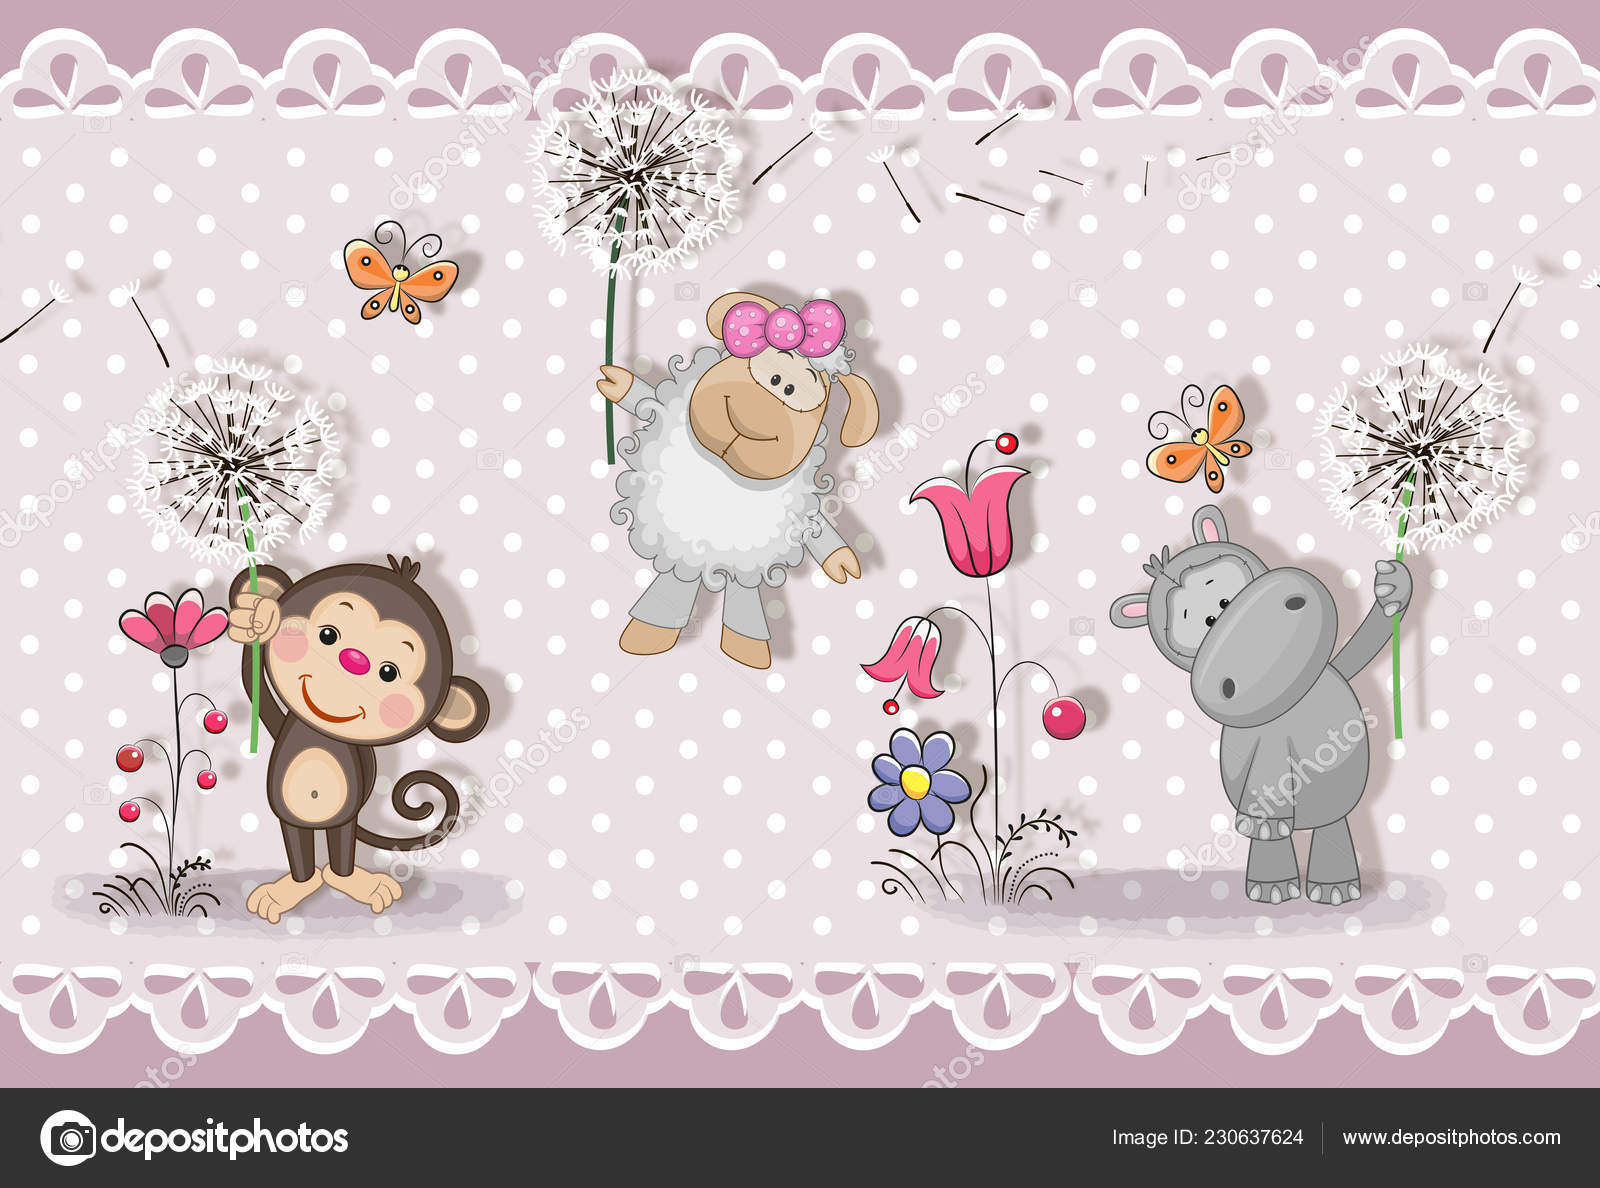 Wallpaper Cute Baby Background Little Animals Greeting Card Pastel  Background Stock Photo by ©Di-VNA 230637624